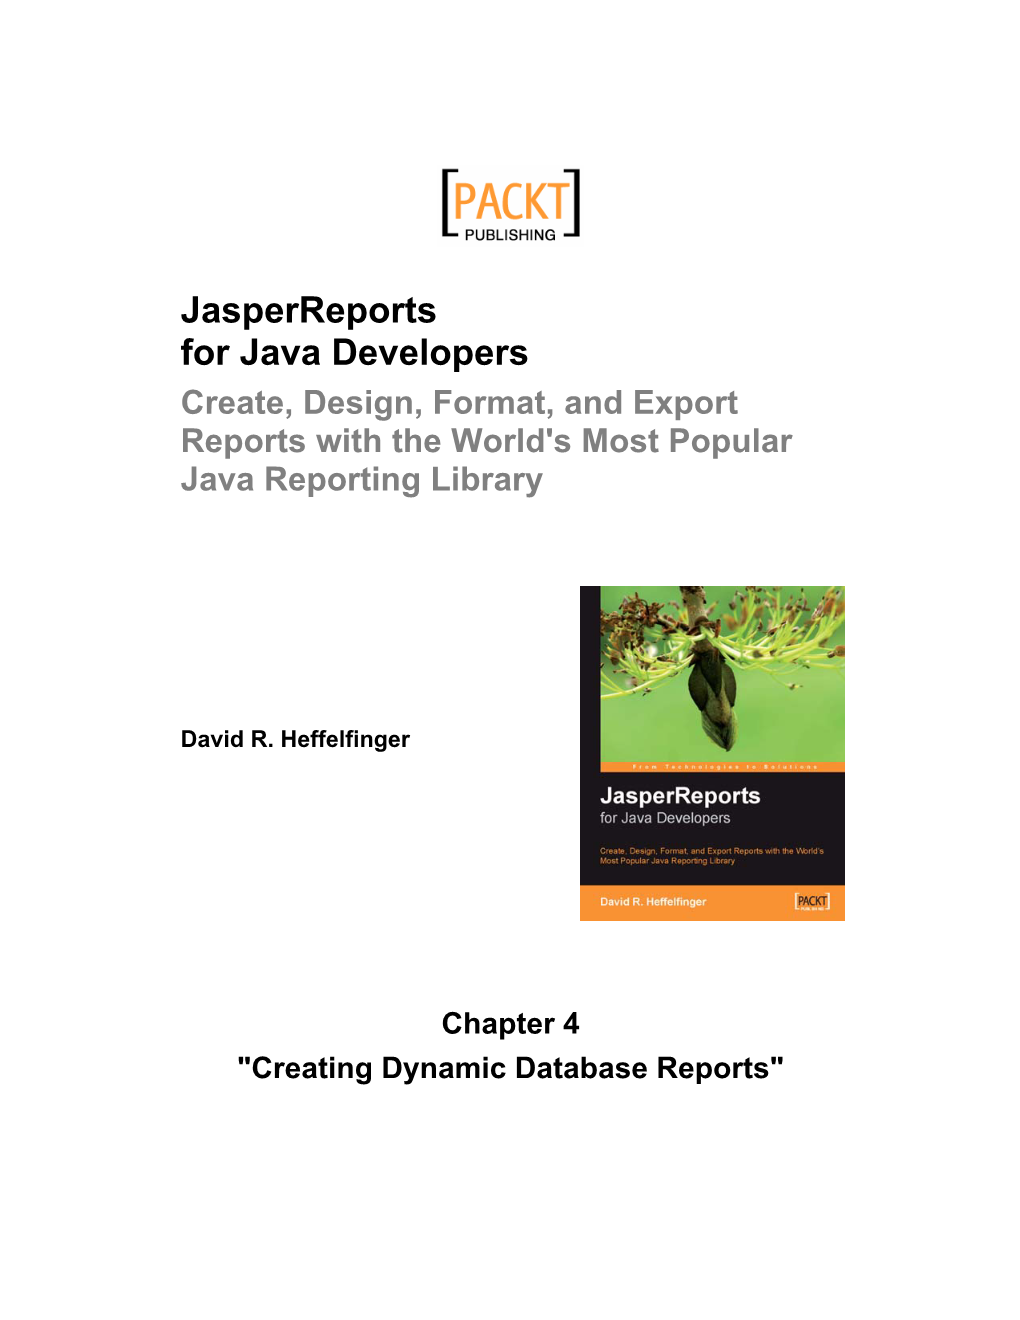 Jasperreports for Java Developers Create, Design, Format, and Export Reports with the World's Most Popular Java Reporting Library